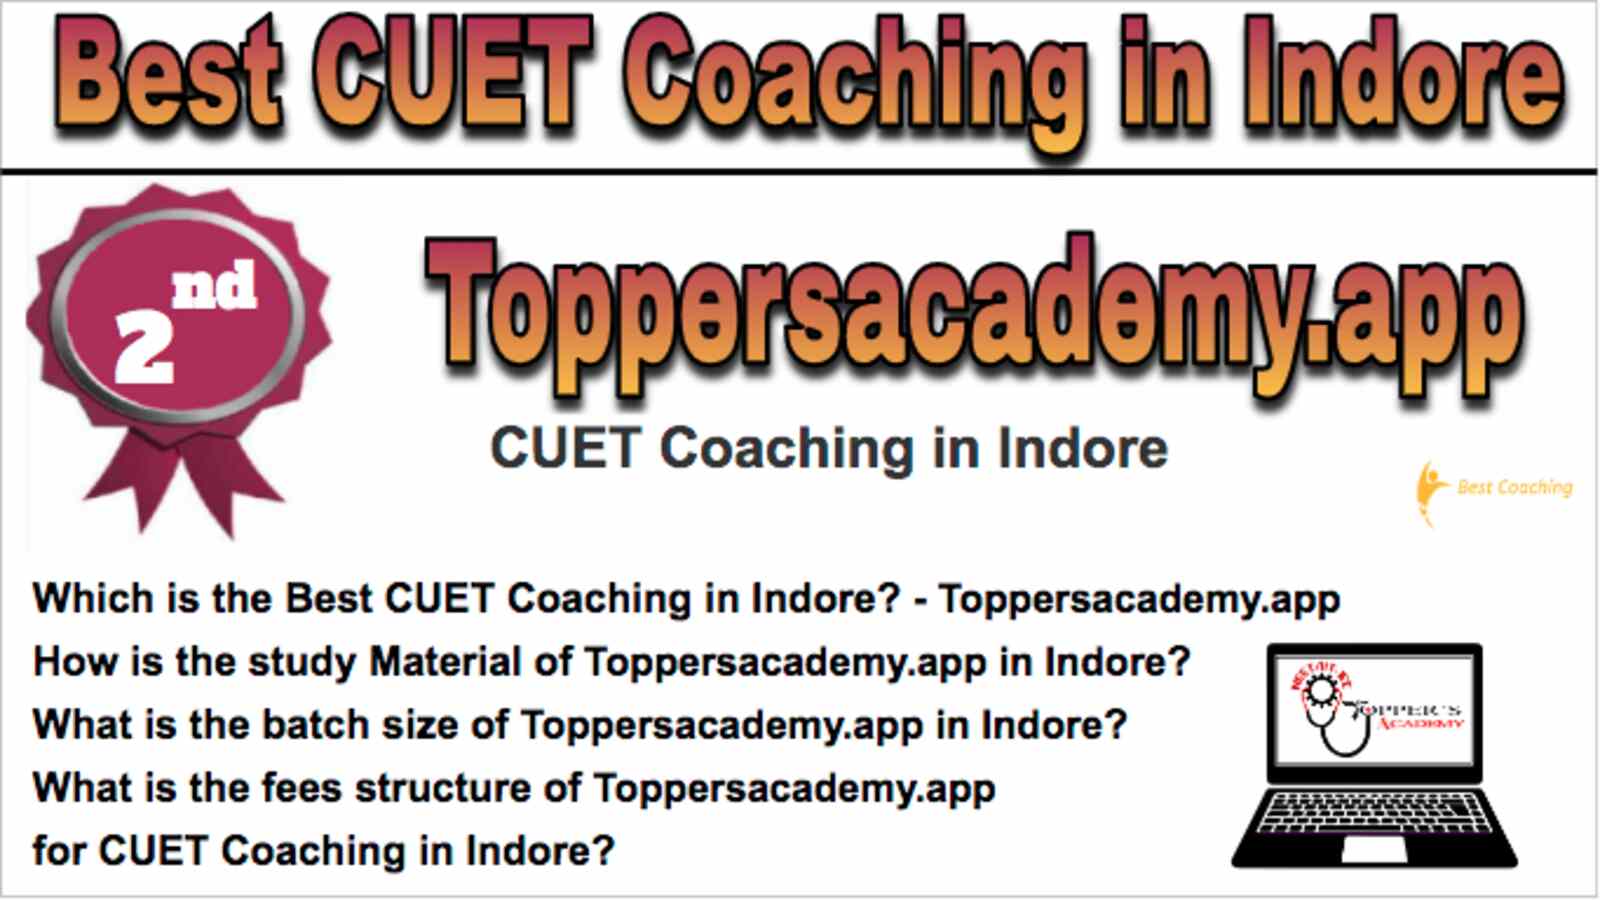 2nd Best CUET Coaching in Indore